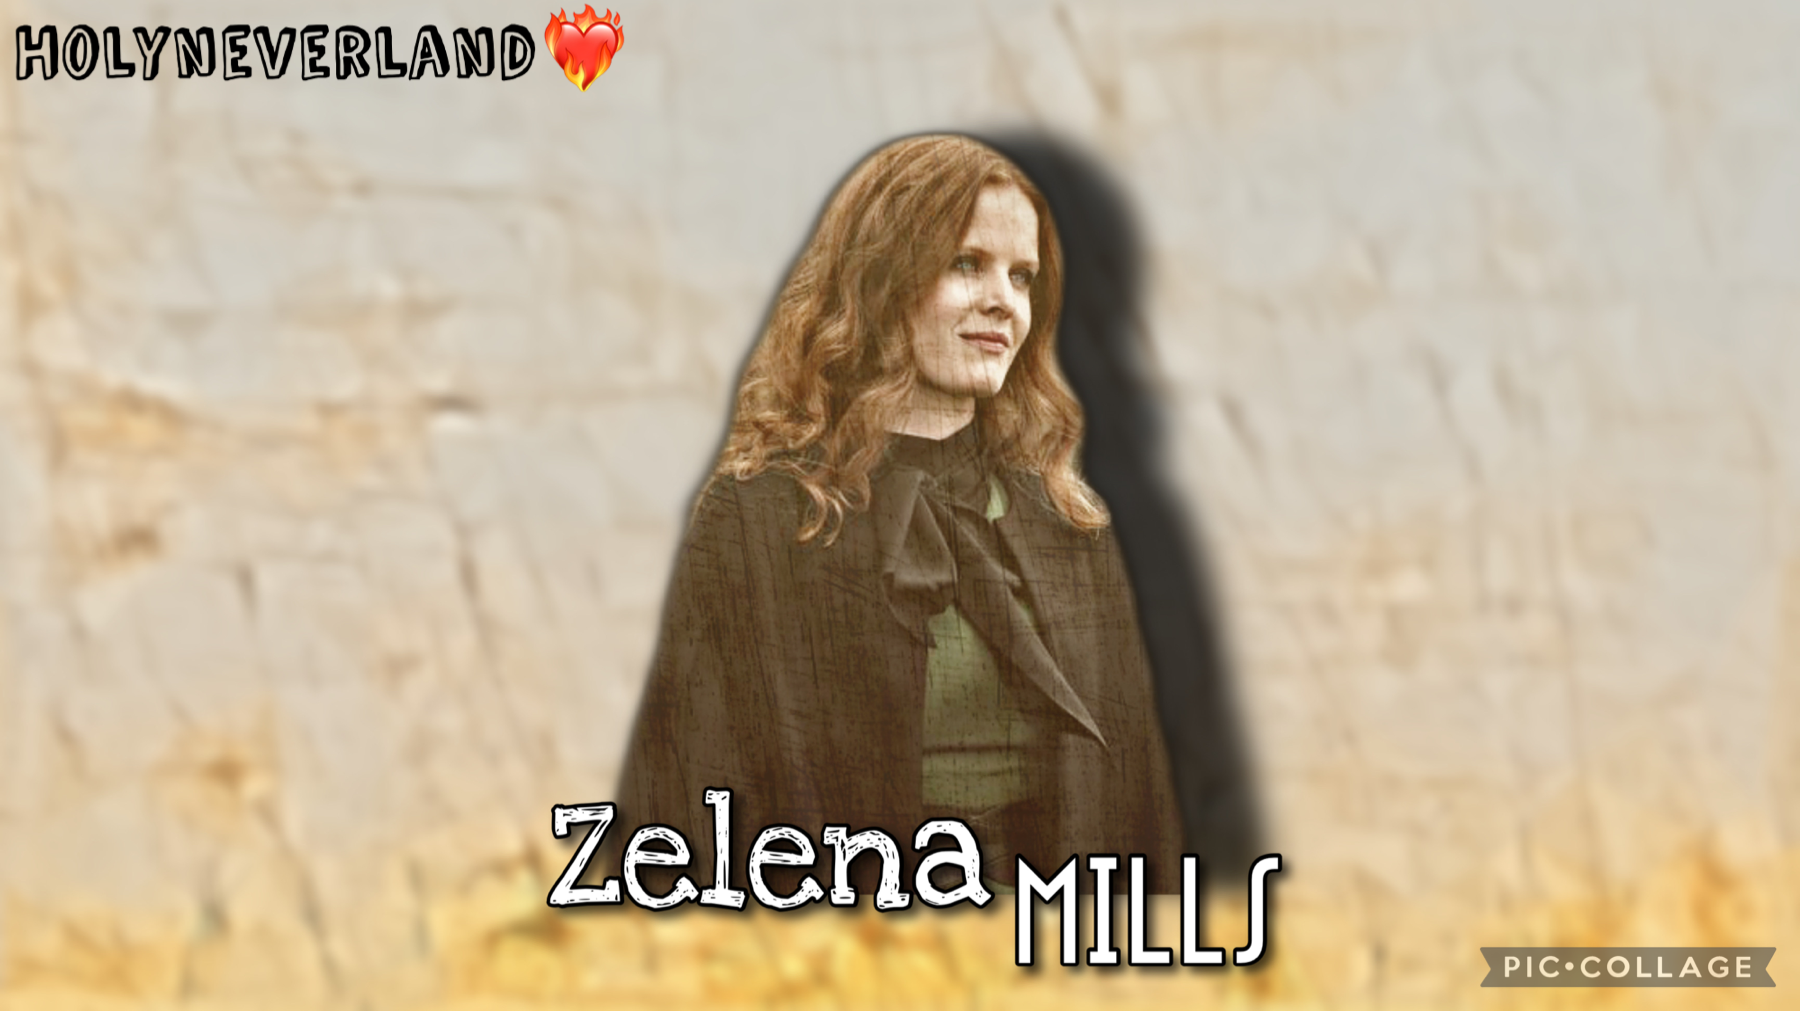 Zelena mills (a tumbnail for an edit) Rate/10!!!

I’m probably coming back :) I just have to find a new style!!! 